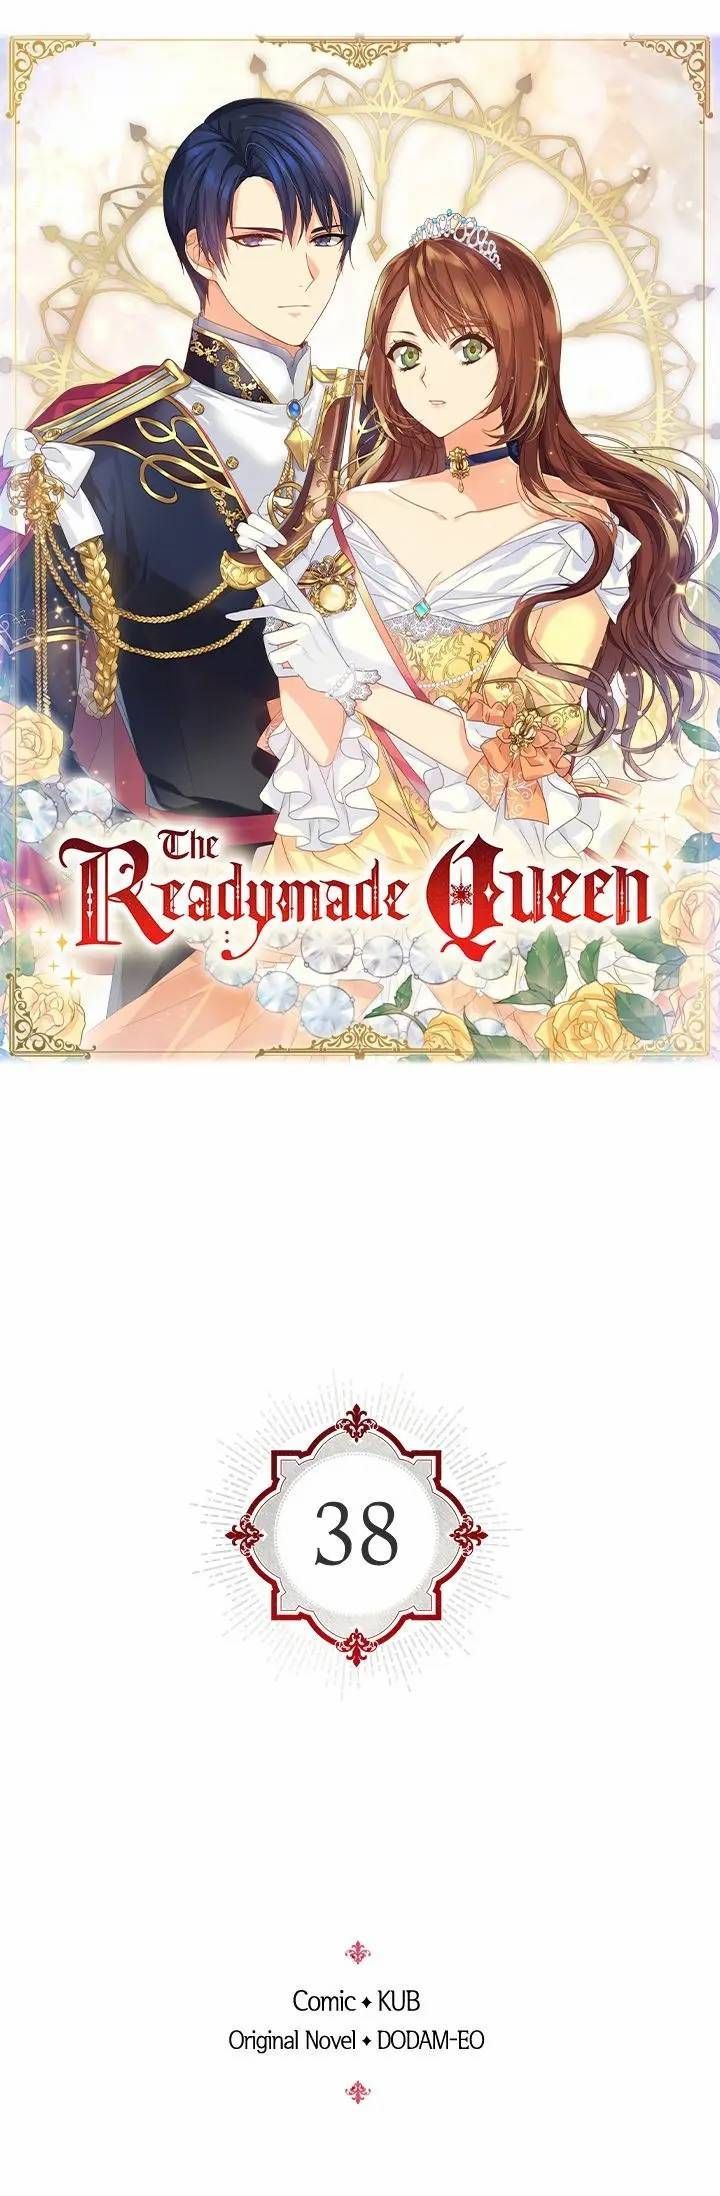 The Readymade Queen Chapter 38 page 1